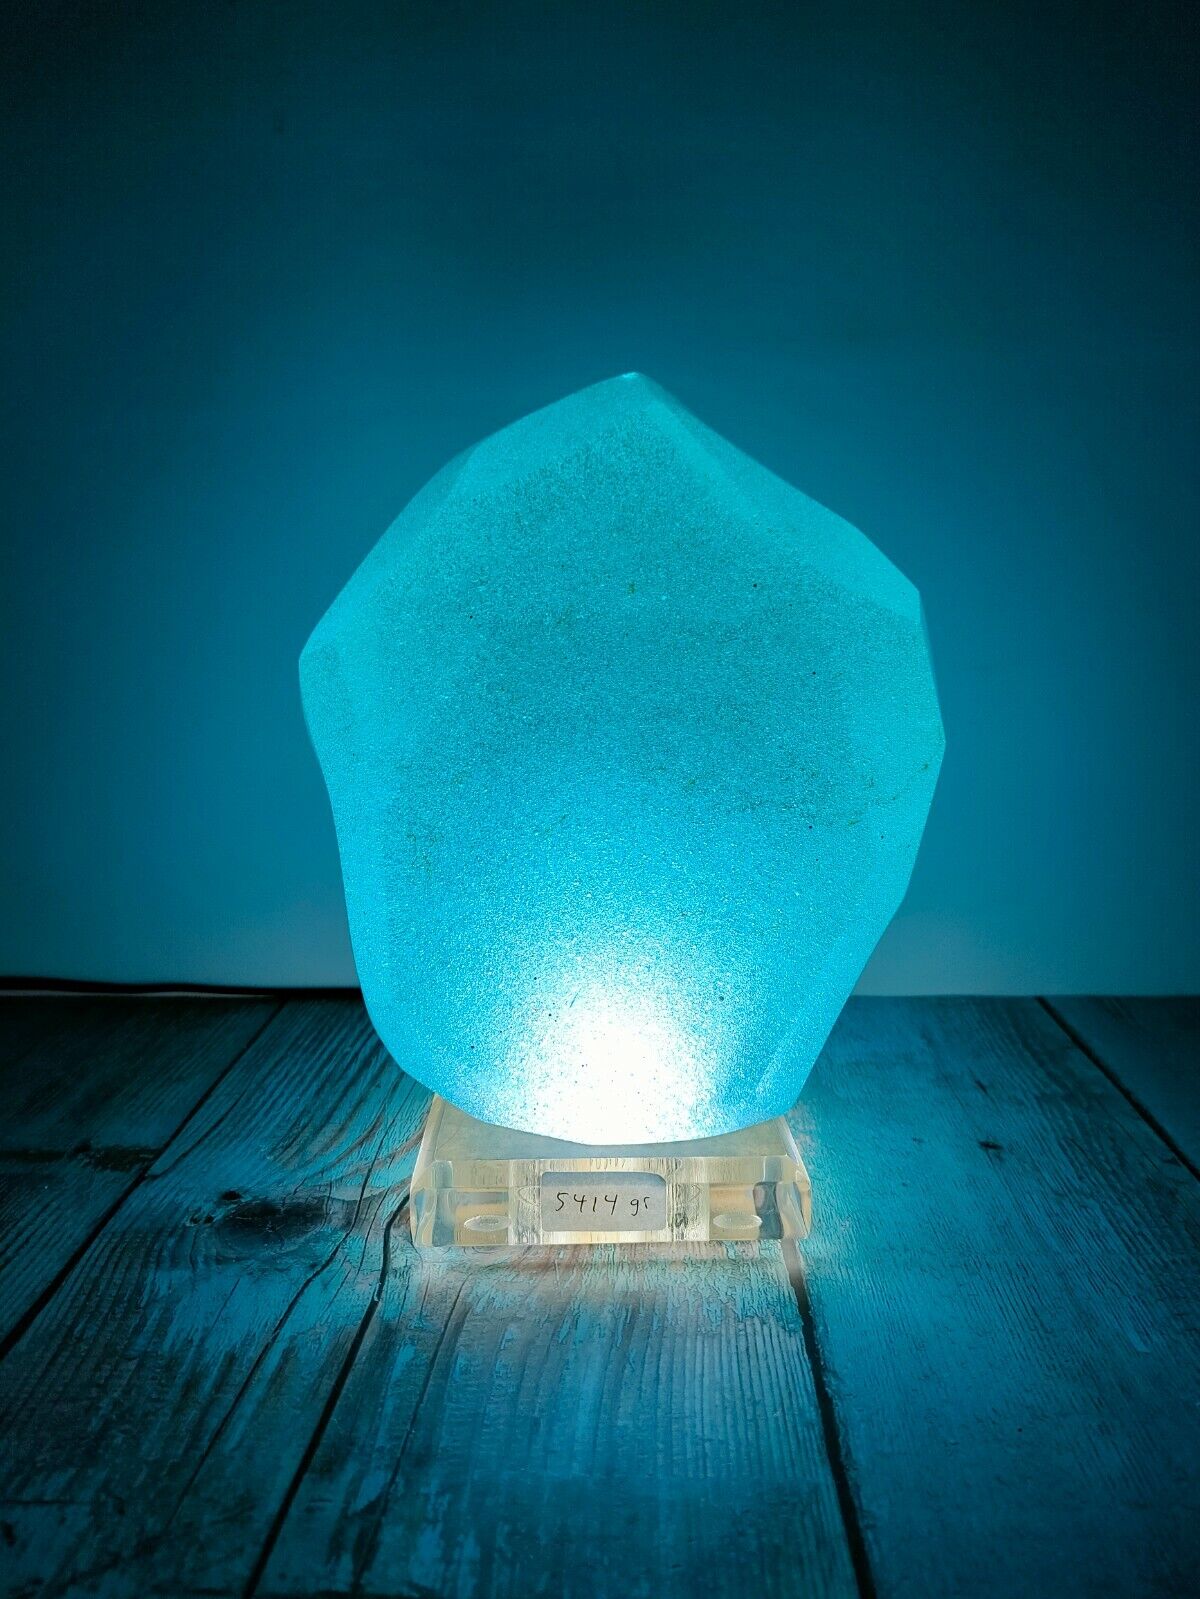 Andara Crystal Cutting Aqua Blue bubble 5414gr with base, lamp & dimmer